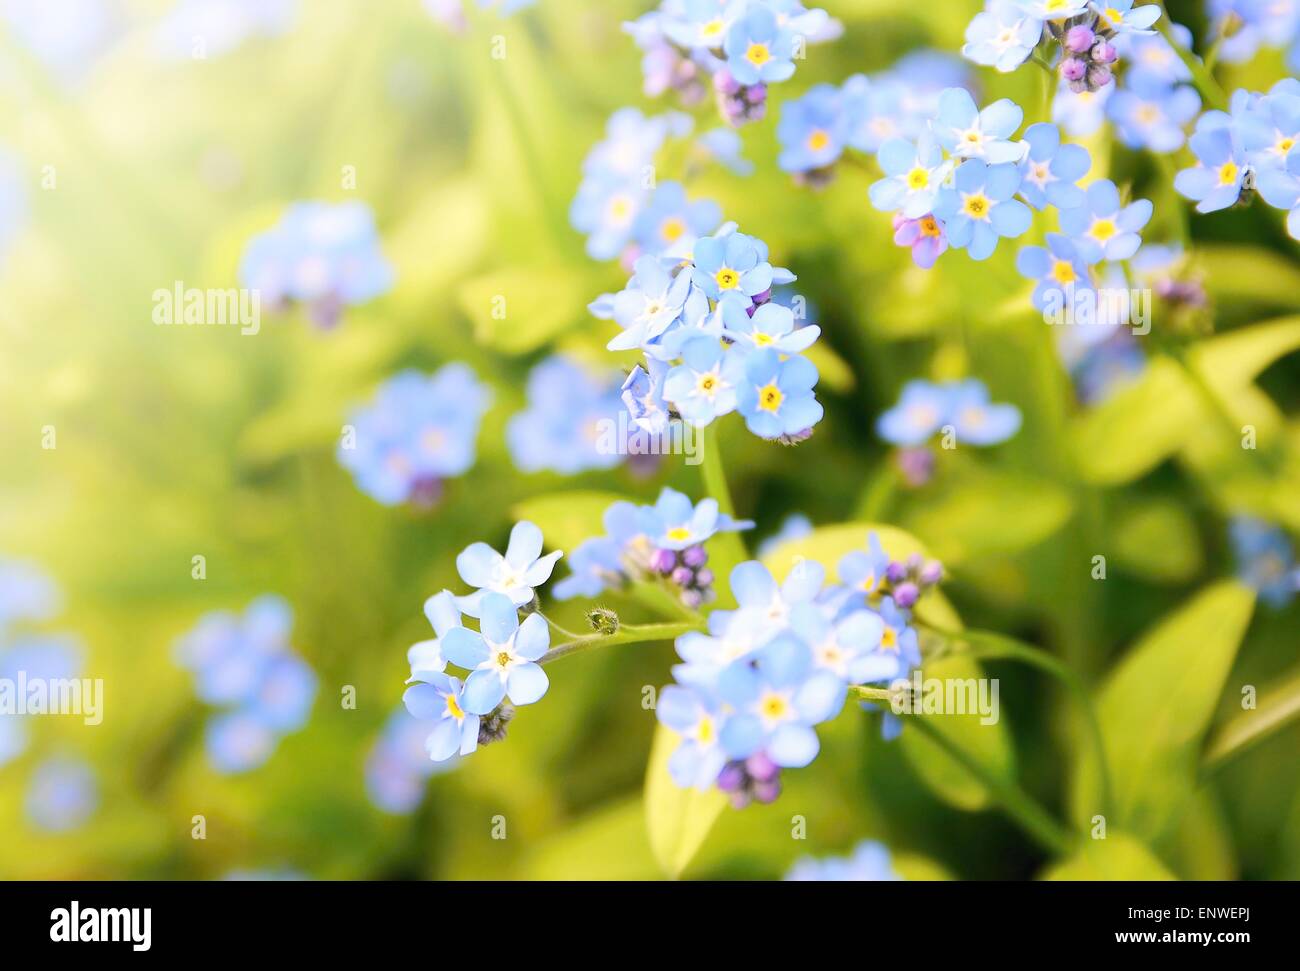 Closeup of the Forget me not plant (Myosotis sylvatica). This plant has small blue blossom and green leaves. Stock Photo